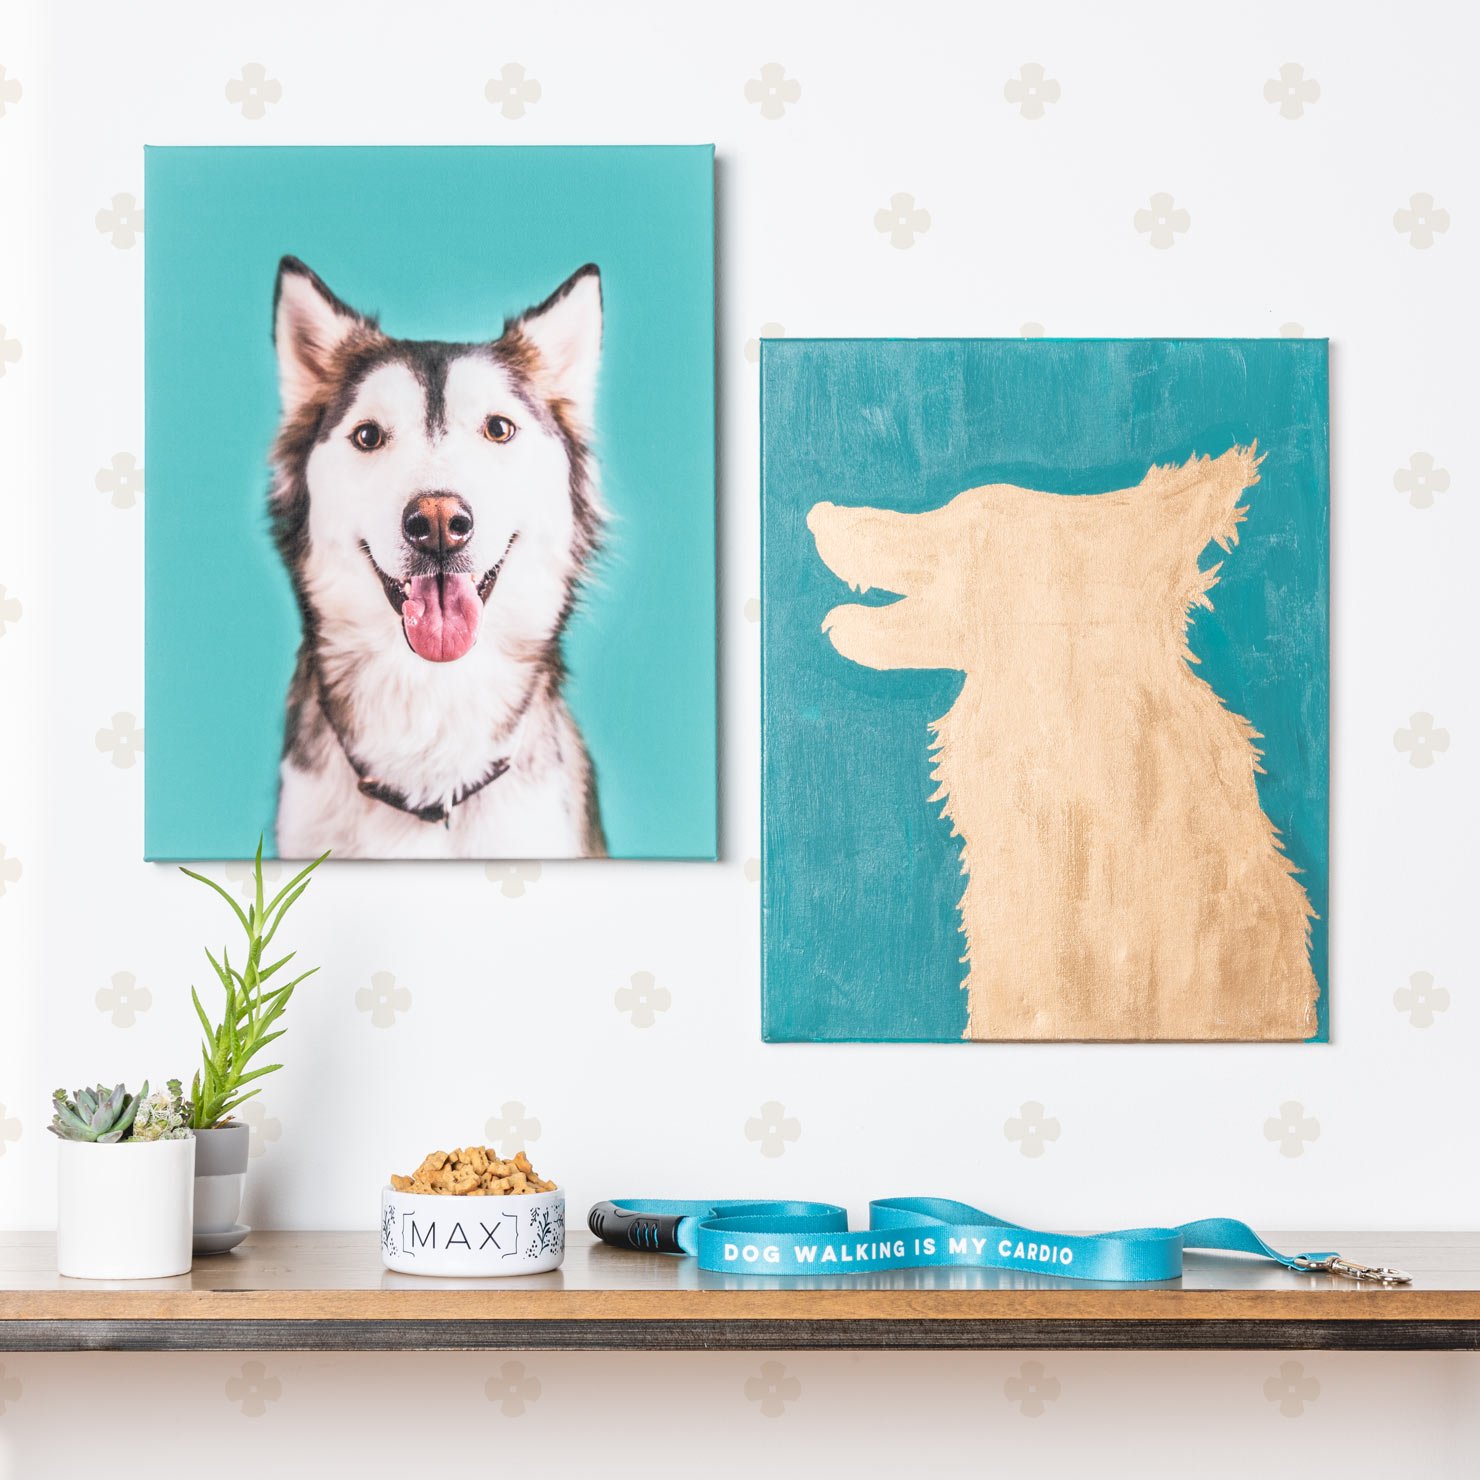 How to Make DIY Dog Silhouette Canvas Art The Bark